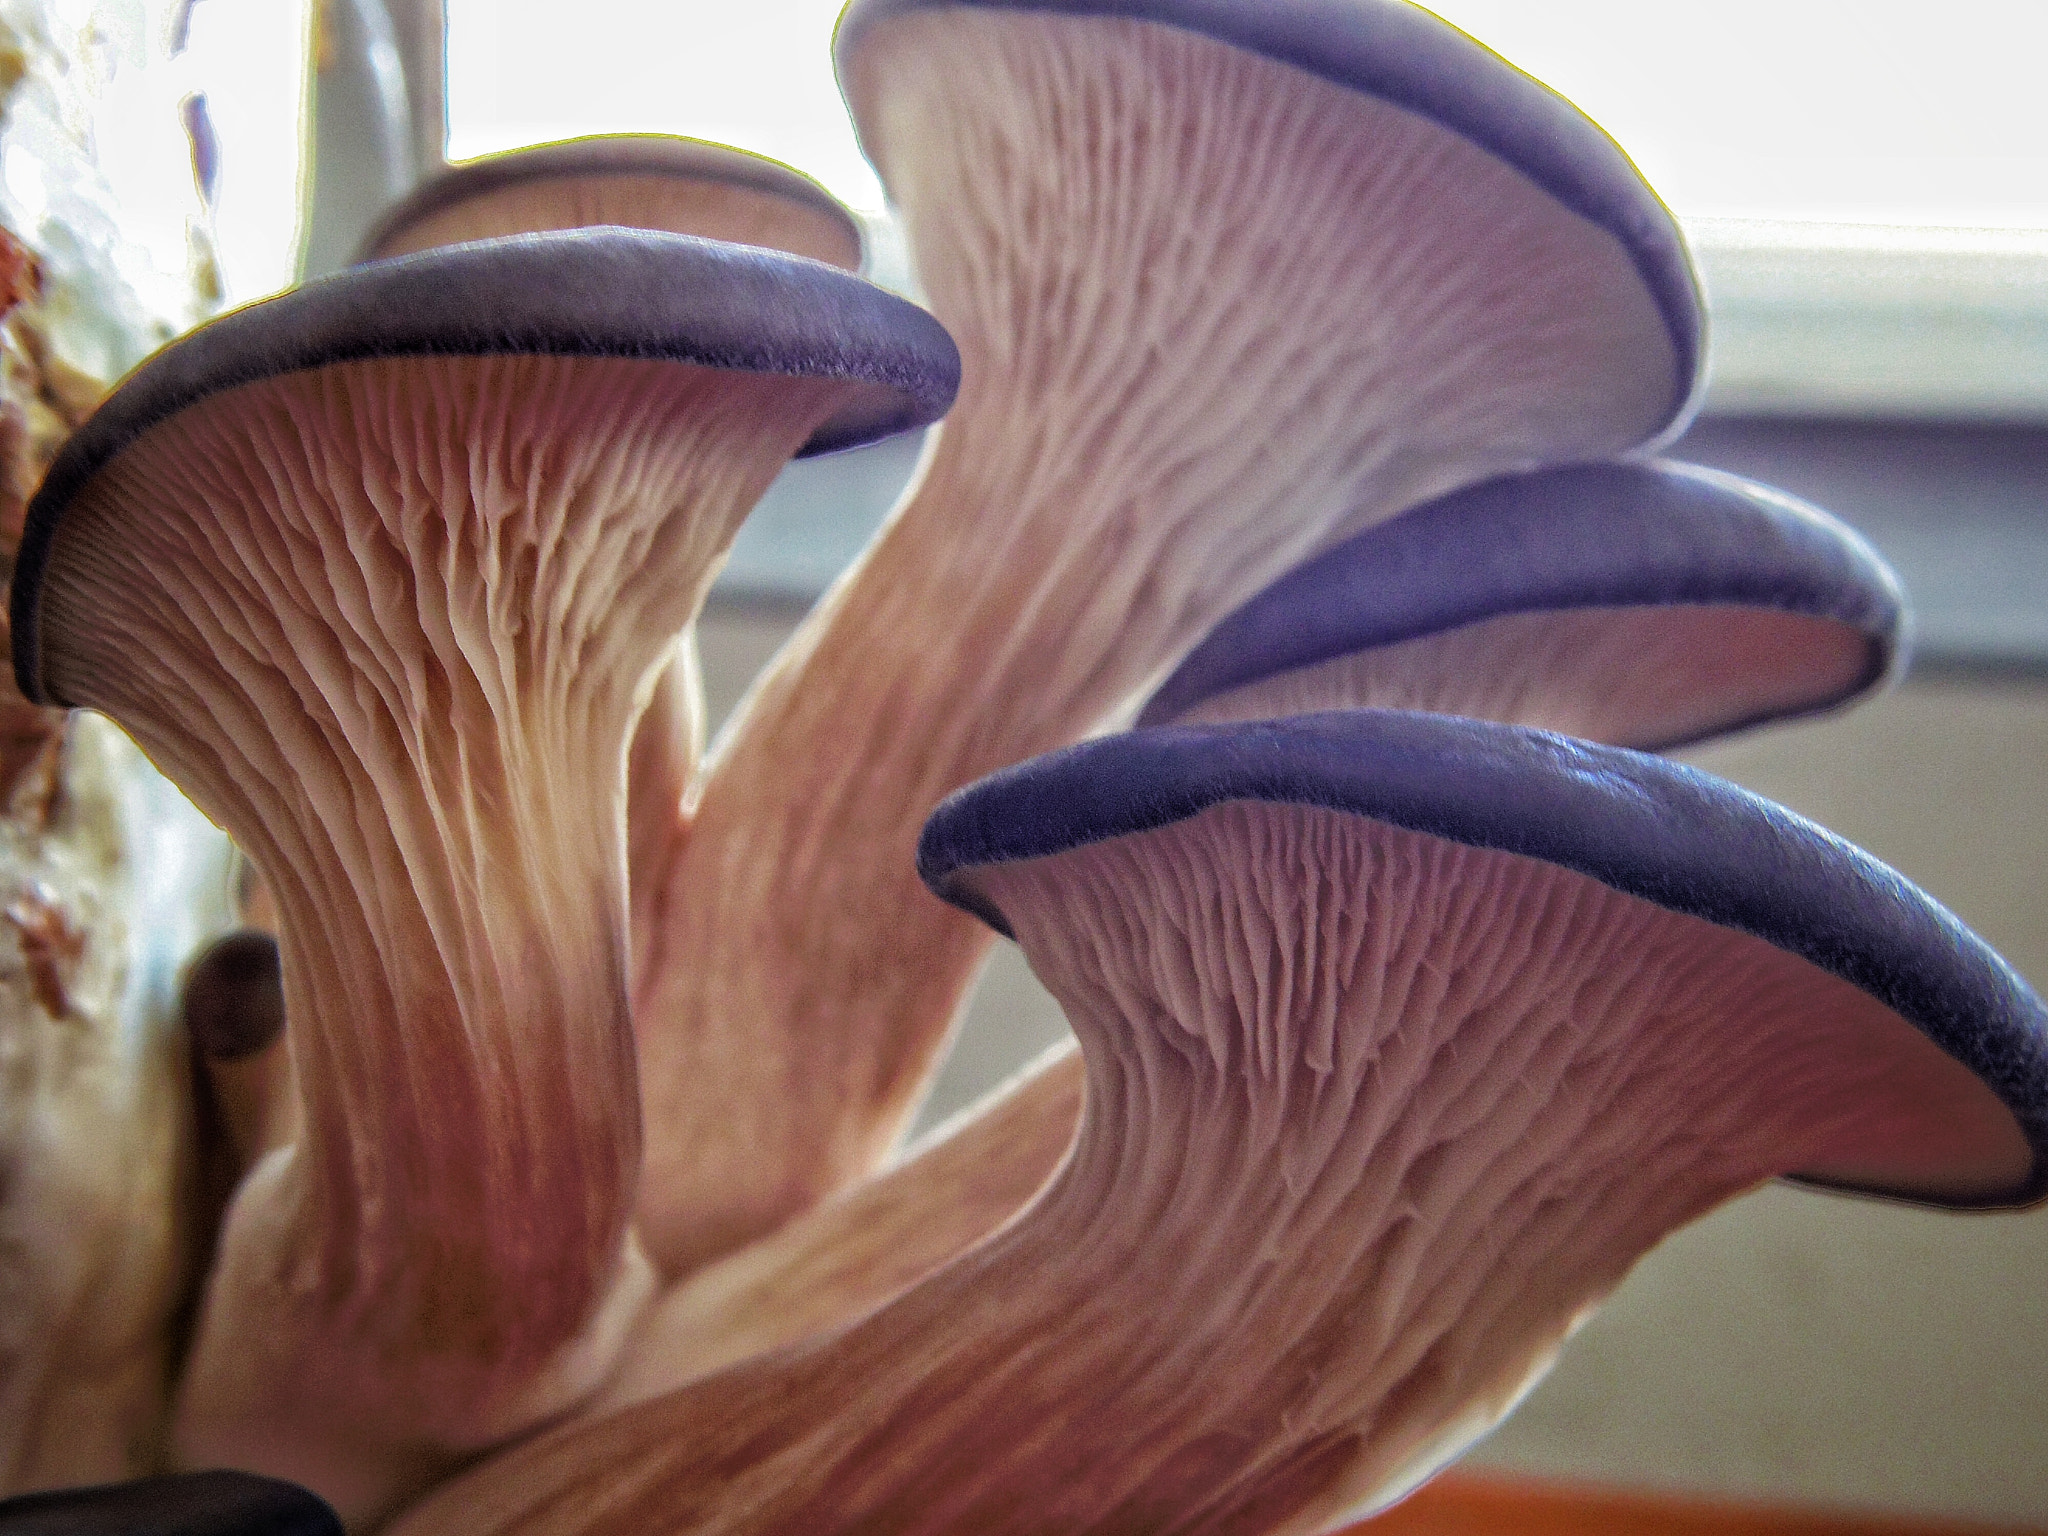 Pentax 01 Standard Prime sample photo. Home-grown pearl oyster mushrooms photography